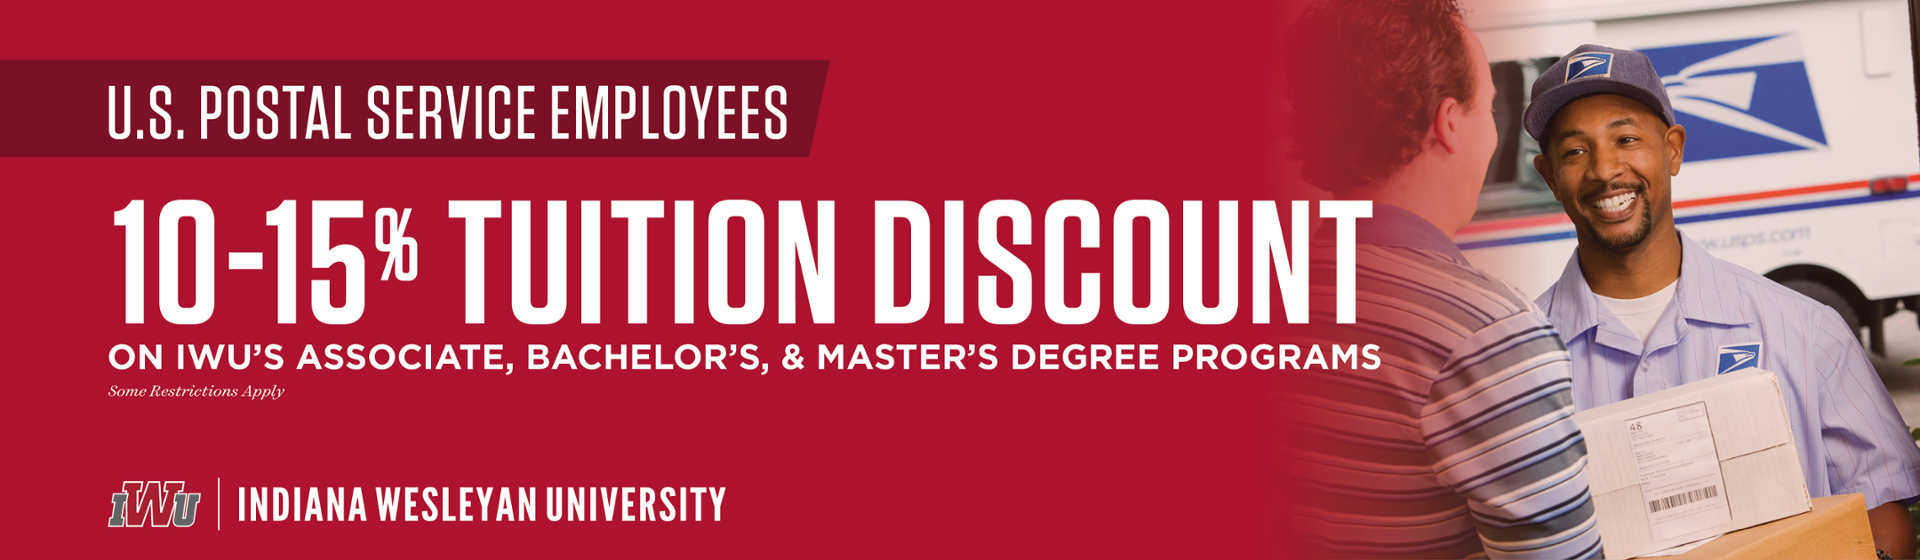 U.S. Postal Service Employees Tuition Discount banner